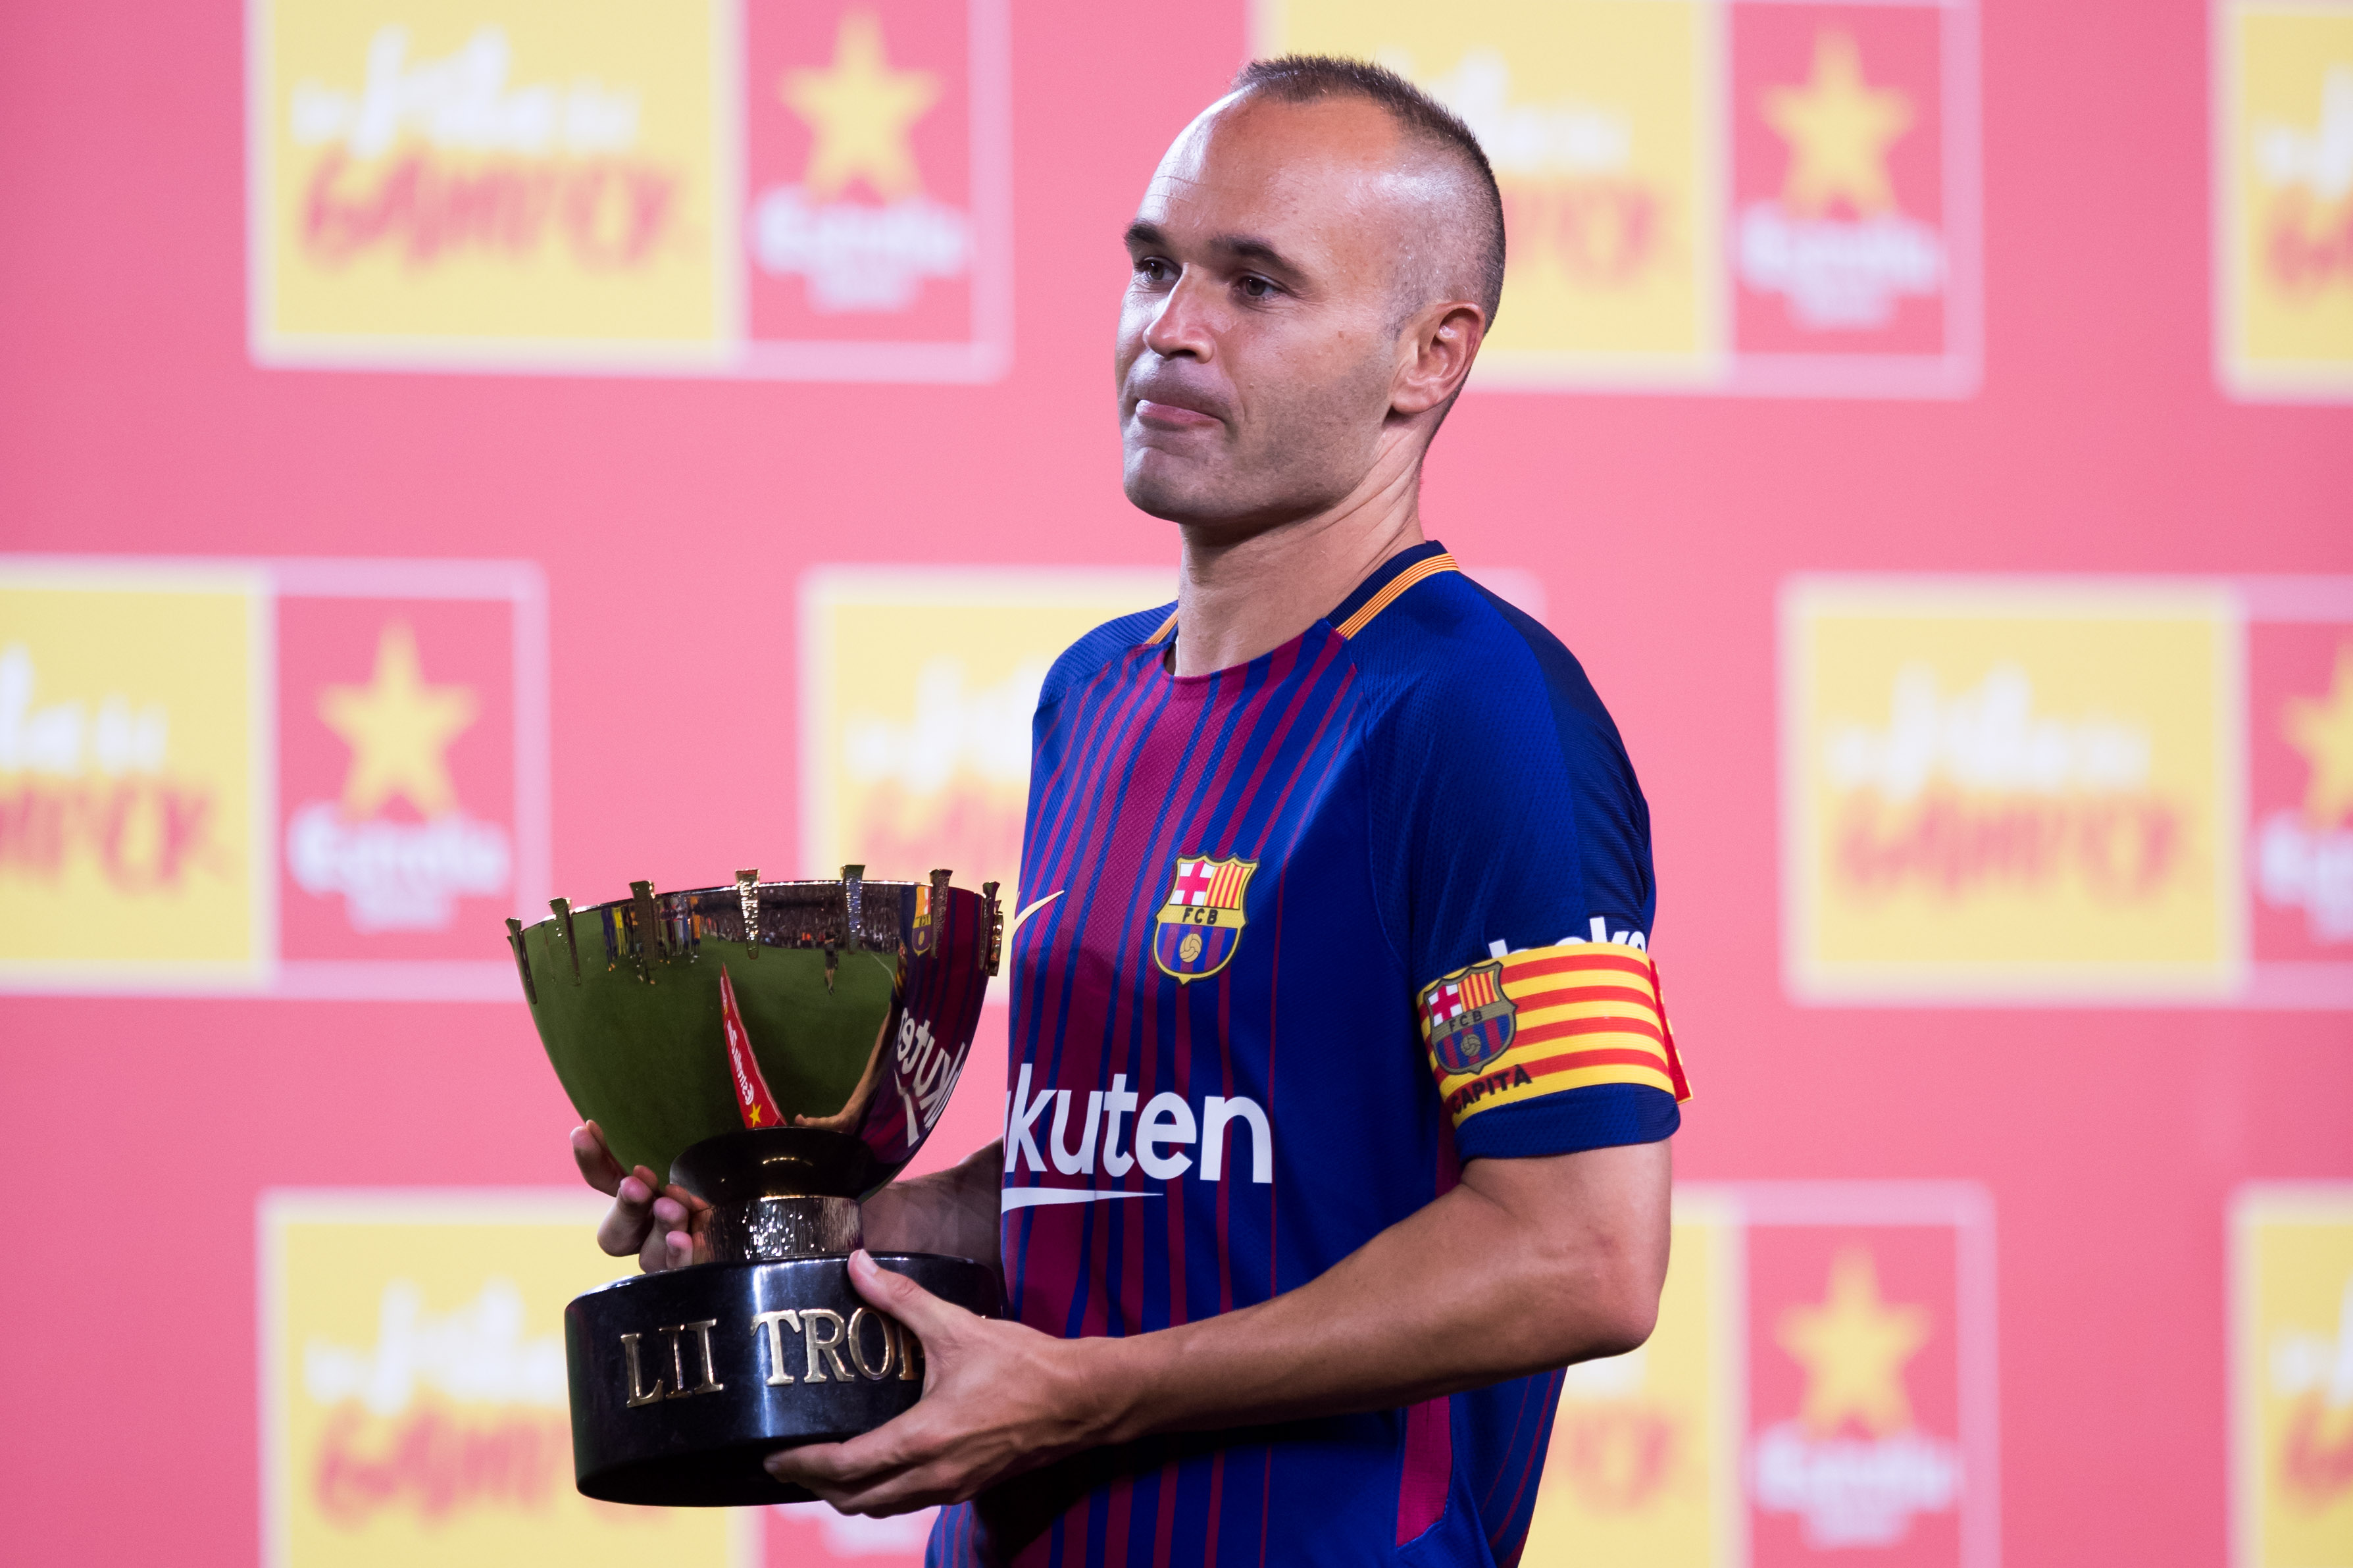 BARCELONA, SPAIN - AUGUST 07: Andres Iniesta of FC Barcelona holds the trophy after the Joan Gamper Trophy match between FC Barcelona and Chapecoense at Camp Nou stadium on August 7, 2017 in Barcelona, Spain. (Photo by Alex Caparros/Getty Images)